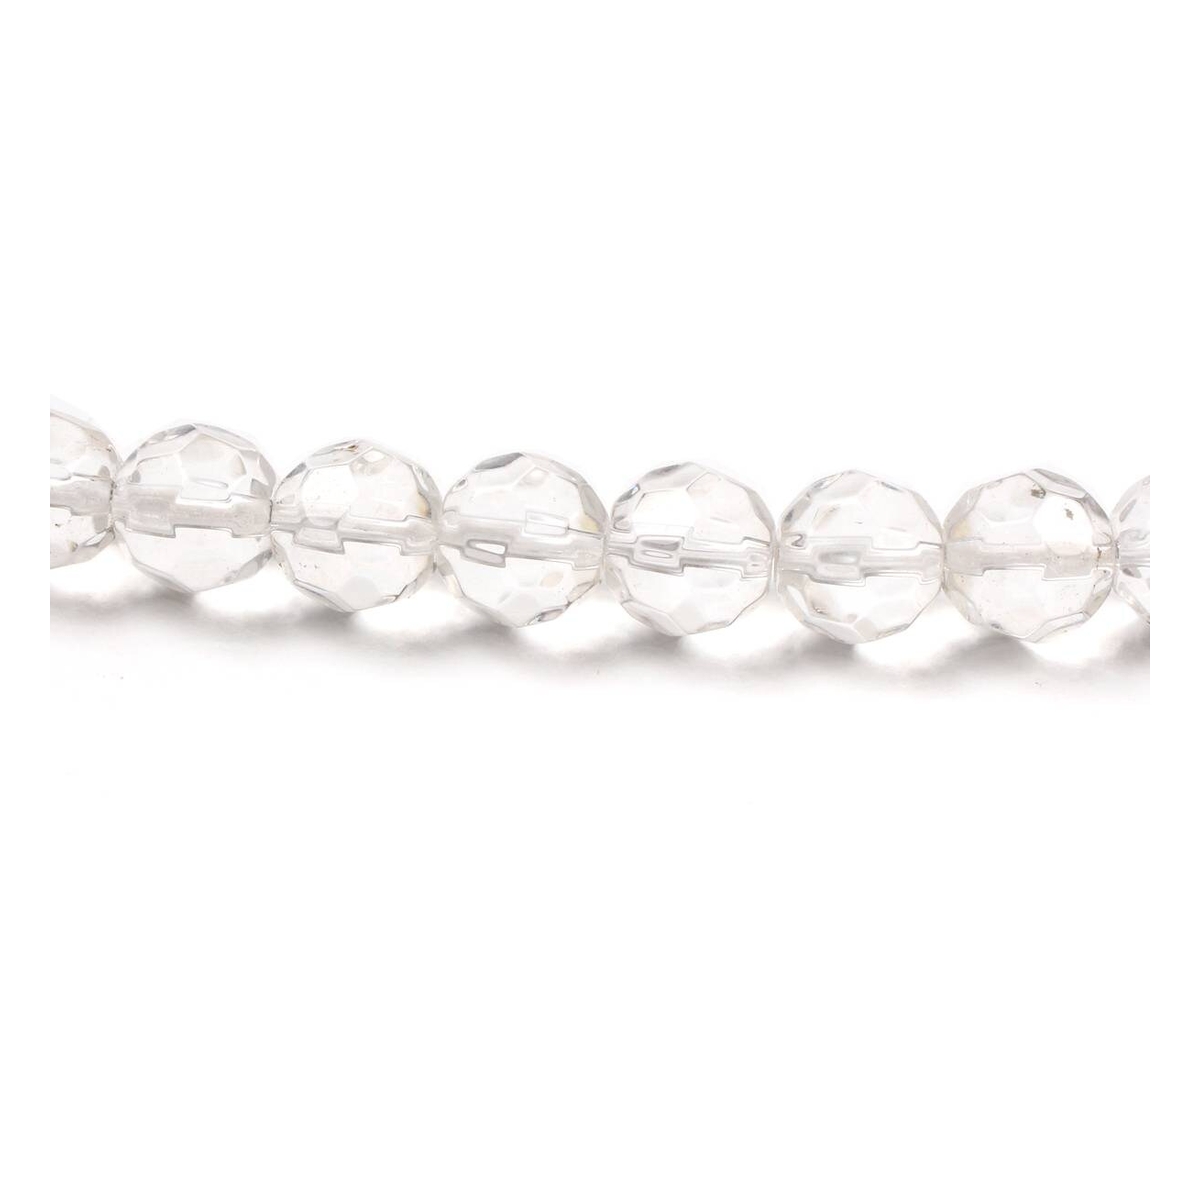 Clear Crystal Round Bead String 16 Pieces | Hobbycraft